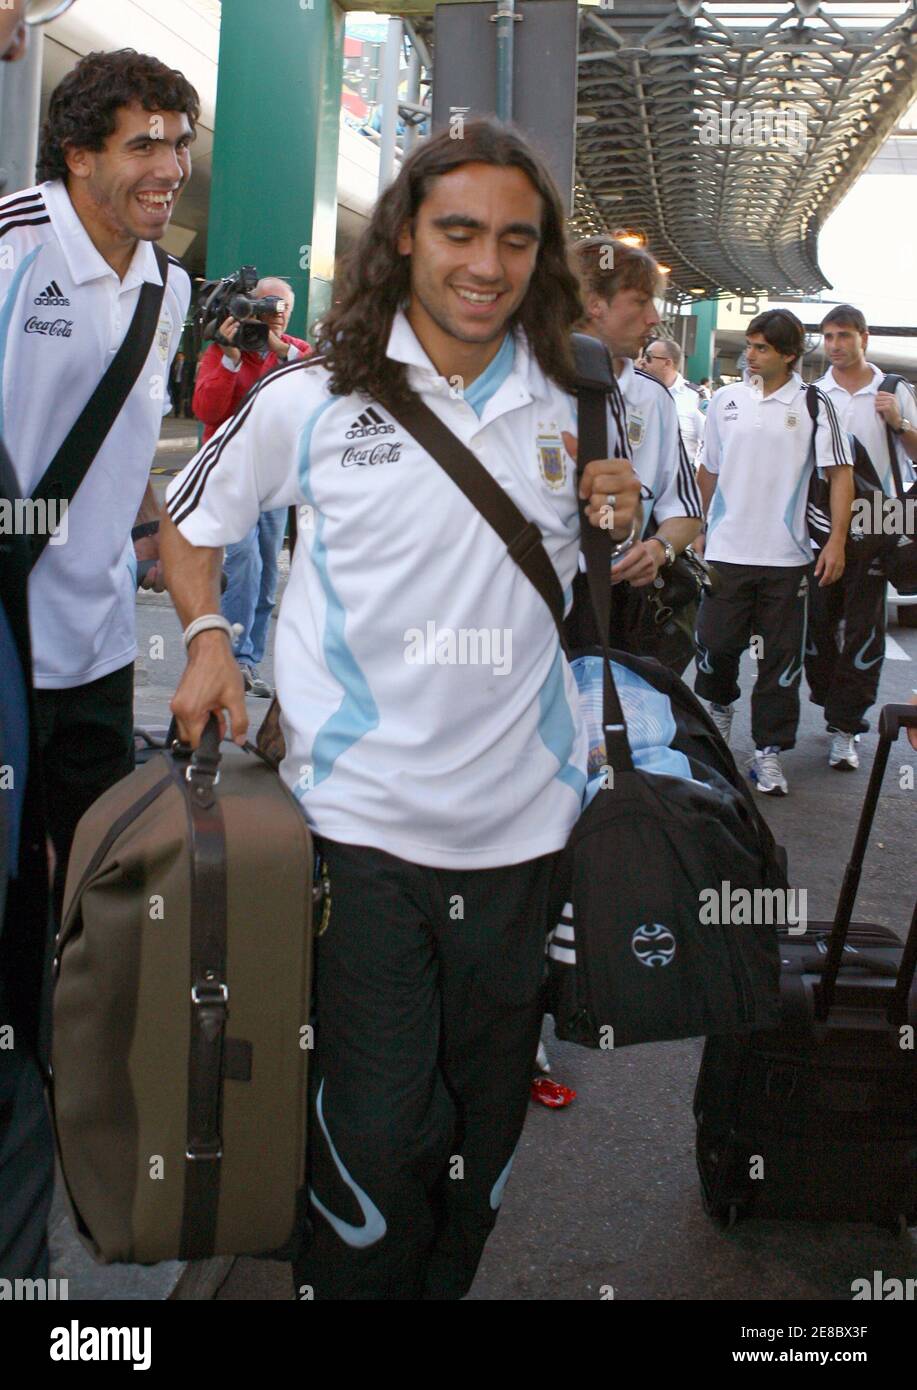 Argentina's Carlos Tevez (L) and Juan Pablo Sorin arrive with their  national team at Fiumicino Airport in Rome, May 26, 2006. WORLD CUP 2006  PREVIEW REUTERS/Giampiero Sposito Stock Photo - Alamy